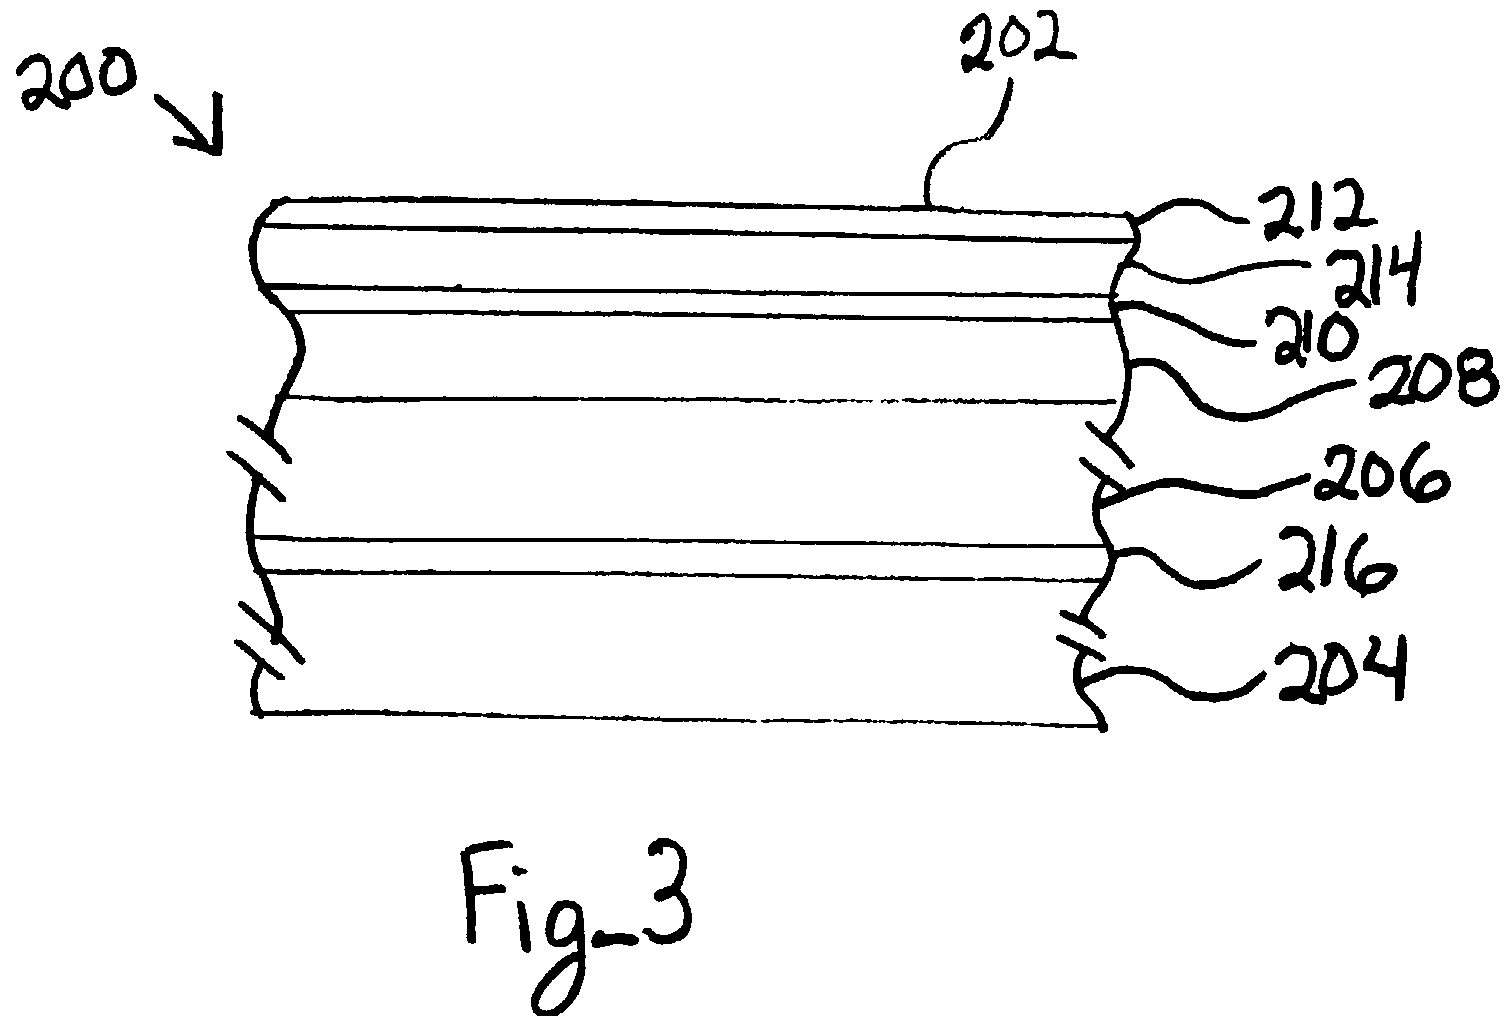 Test strips including flexible array substrates and method of hybridization